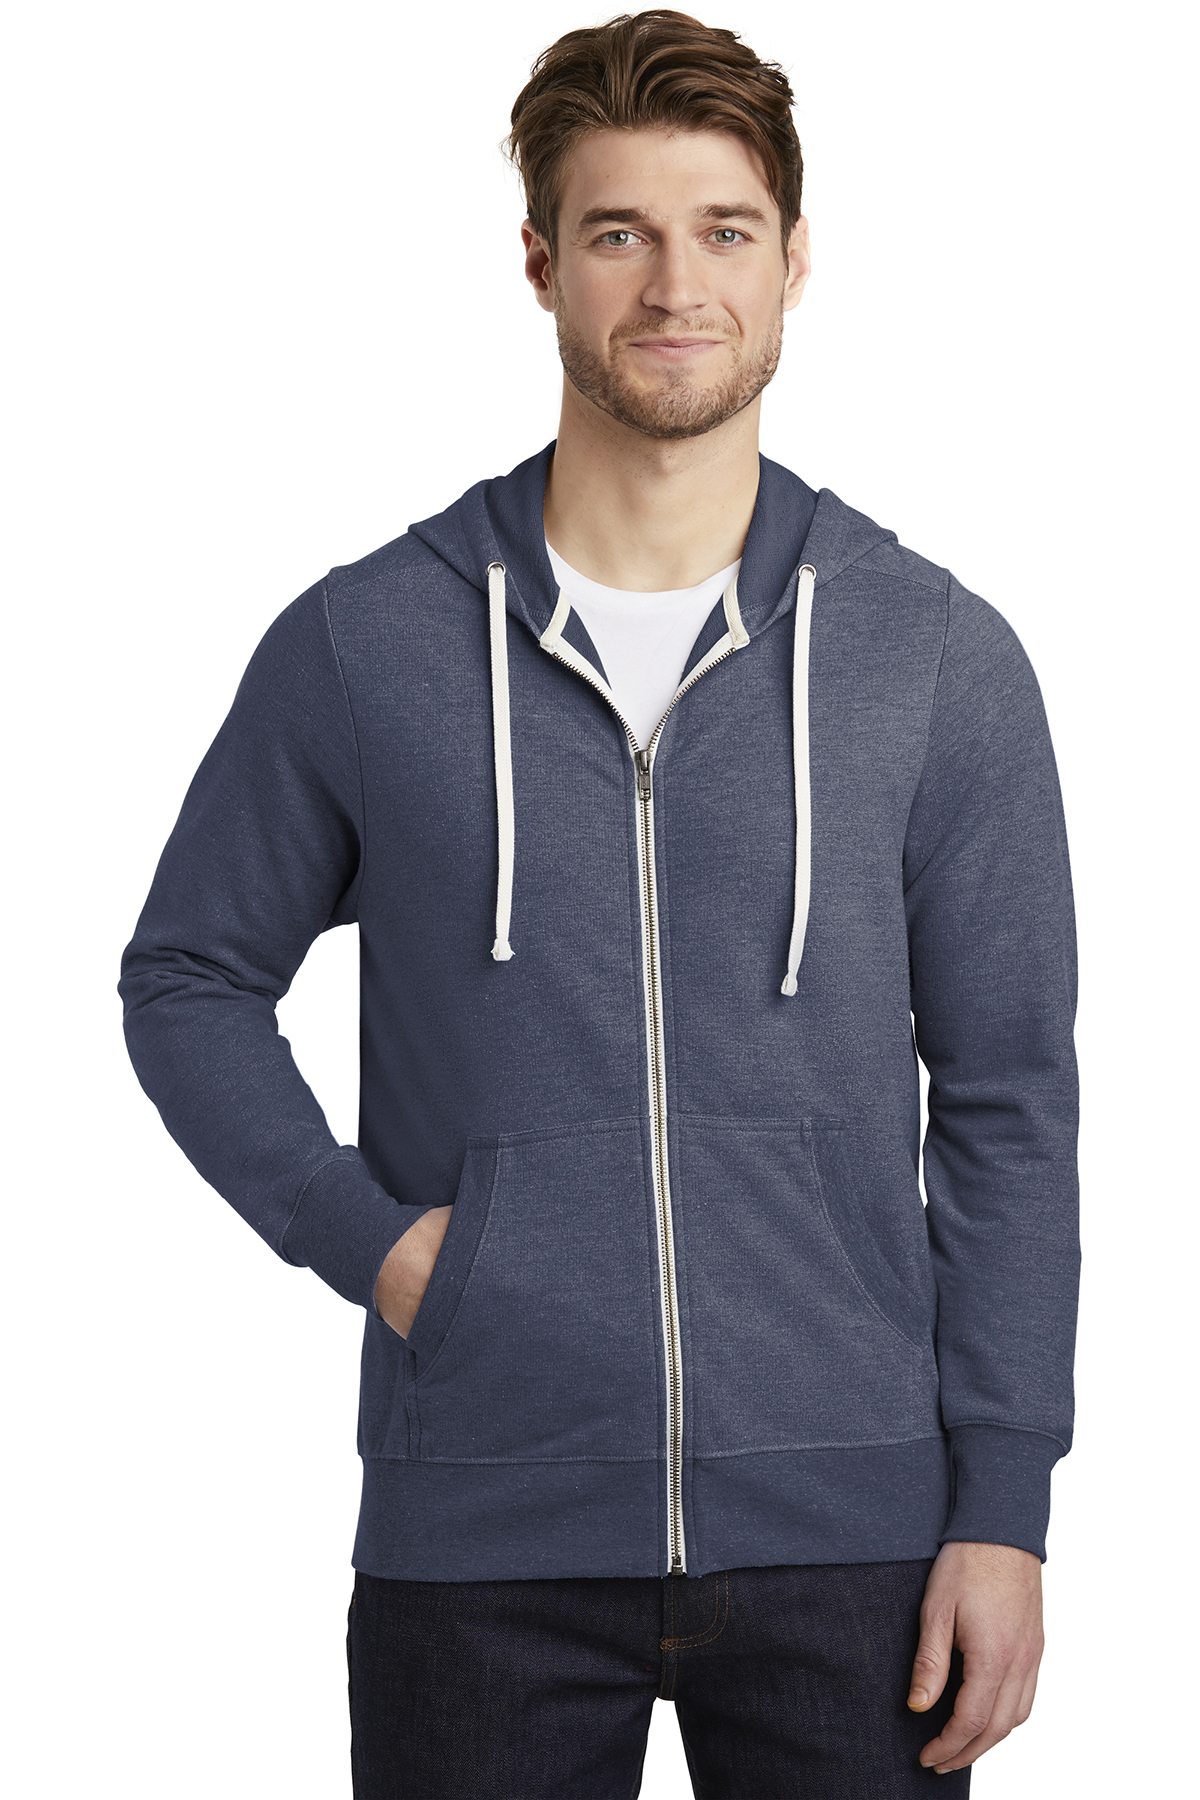 District DT356 - Men's Perfect Tri French Terry Full-Zip Hoodie